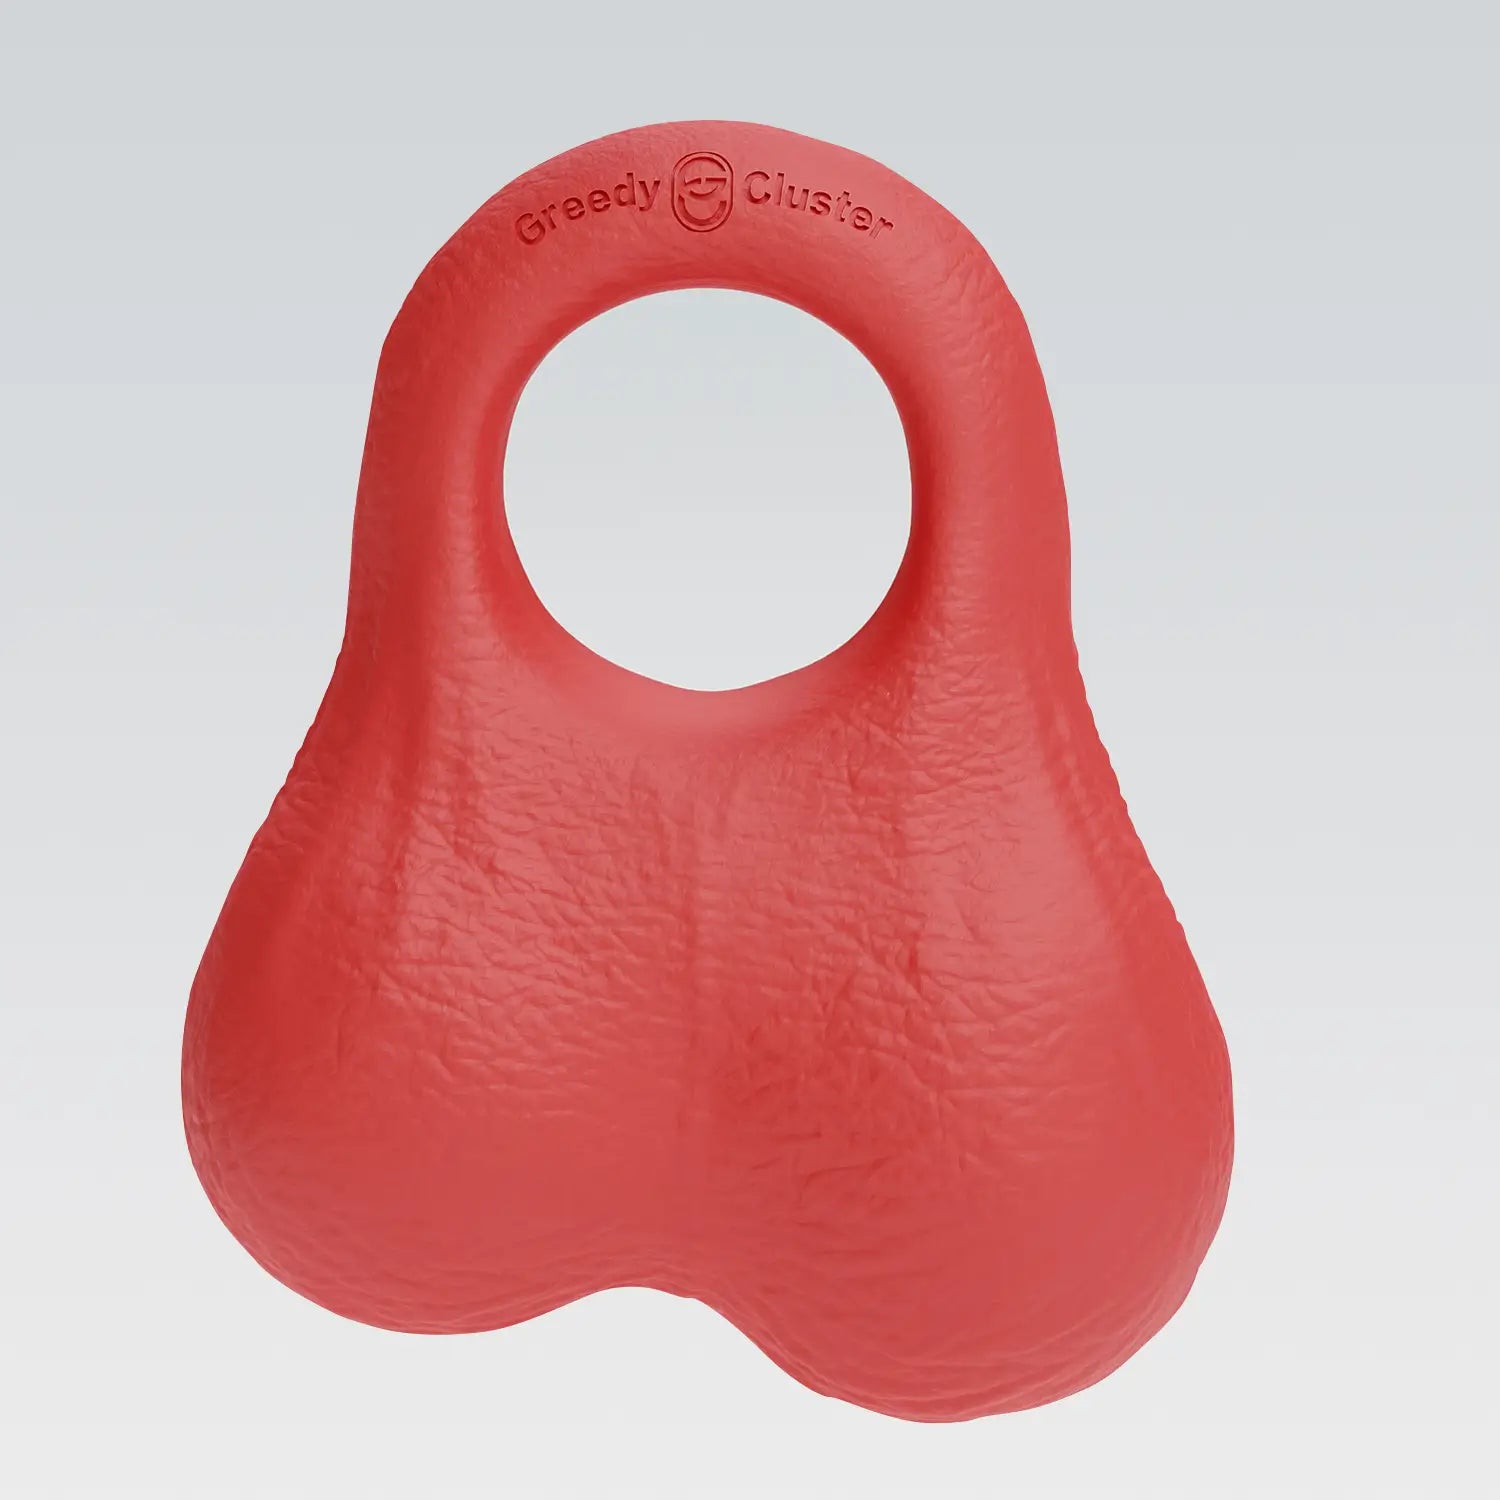 cock ring,c ring,penis ring,dick ring with balls-red color